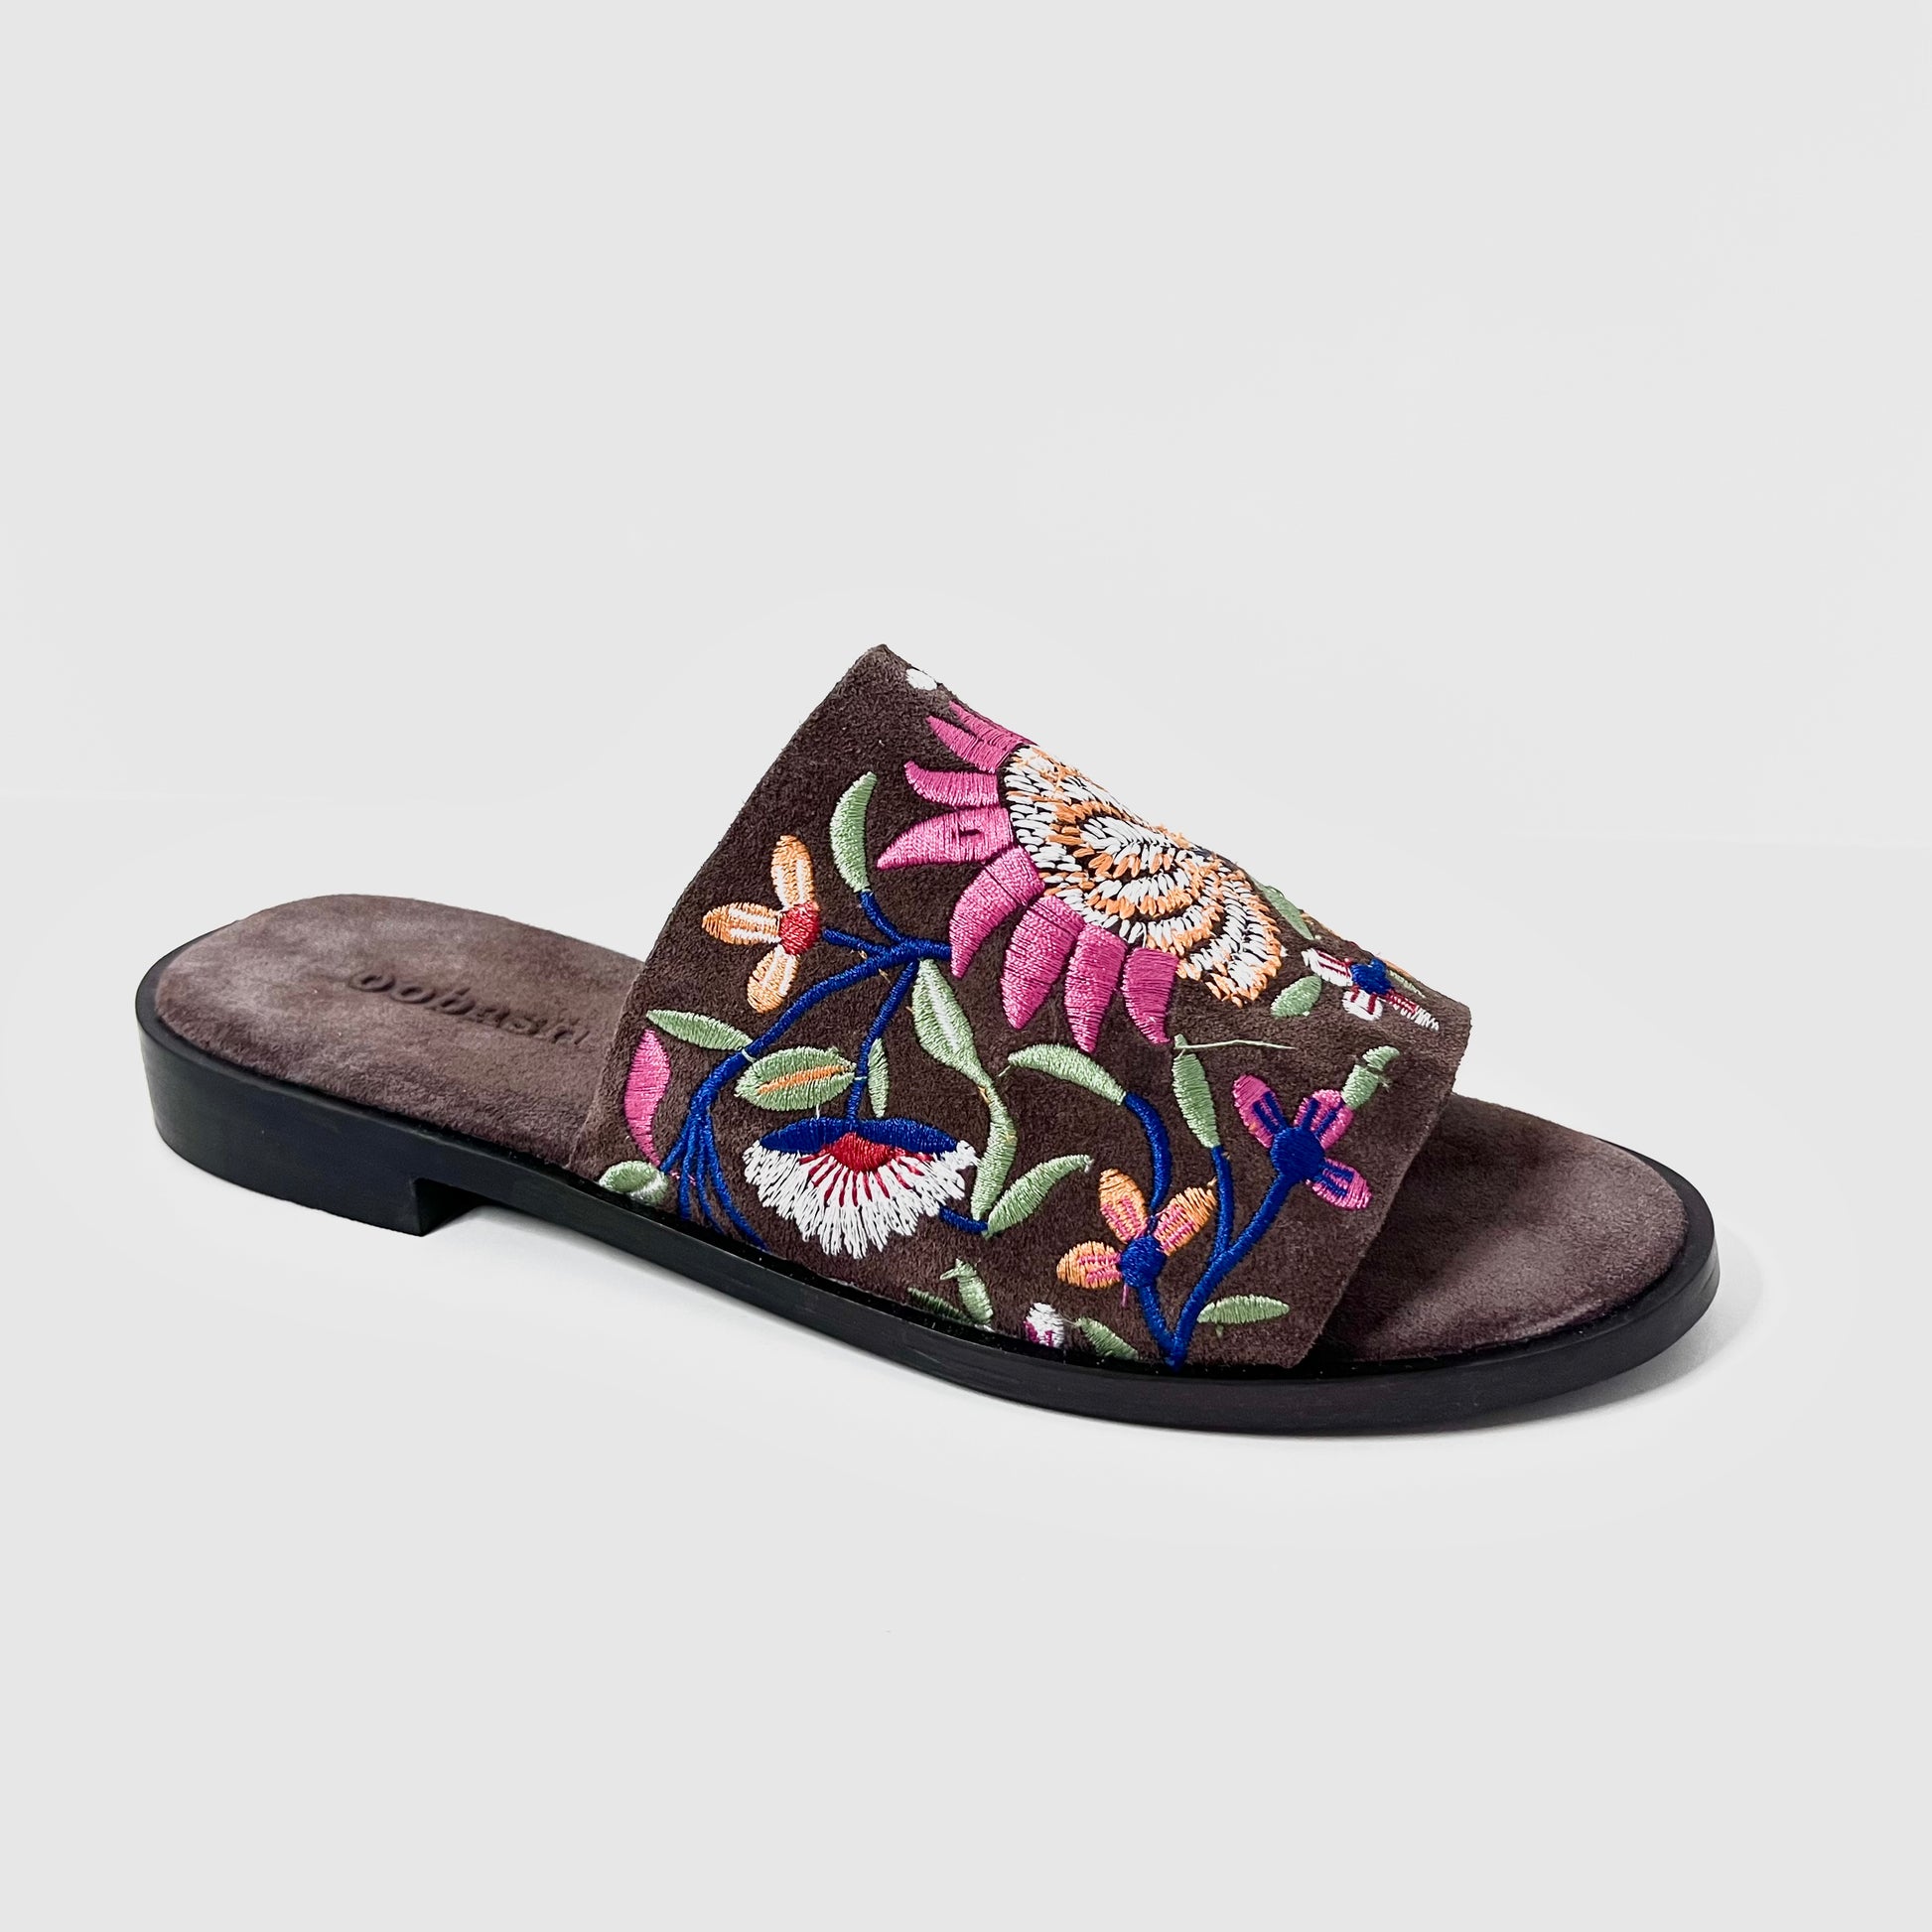 oobash Rose Brown colour embroidered suede leather Mule sandal